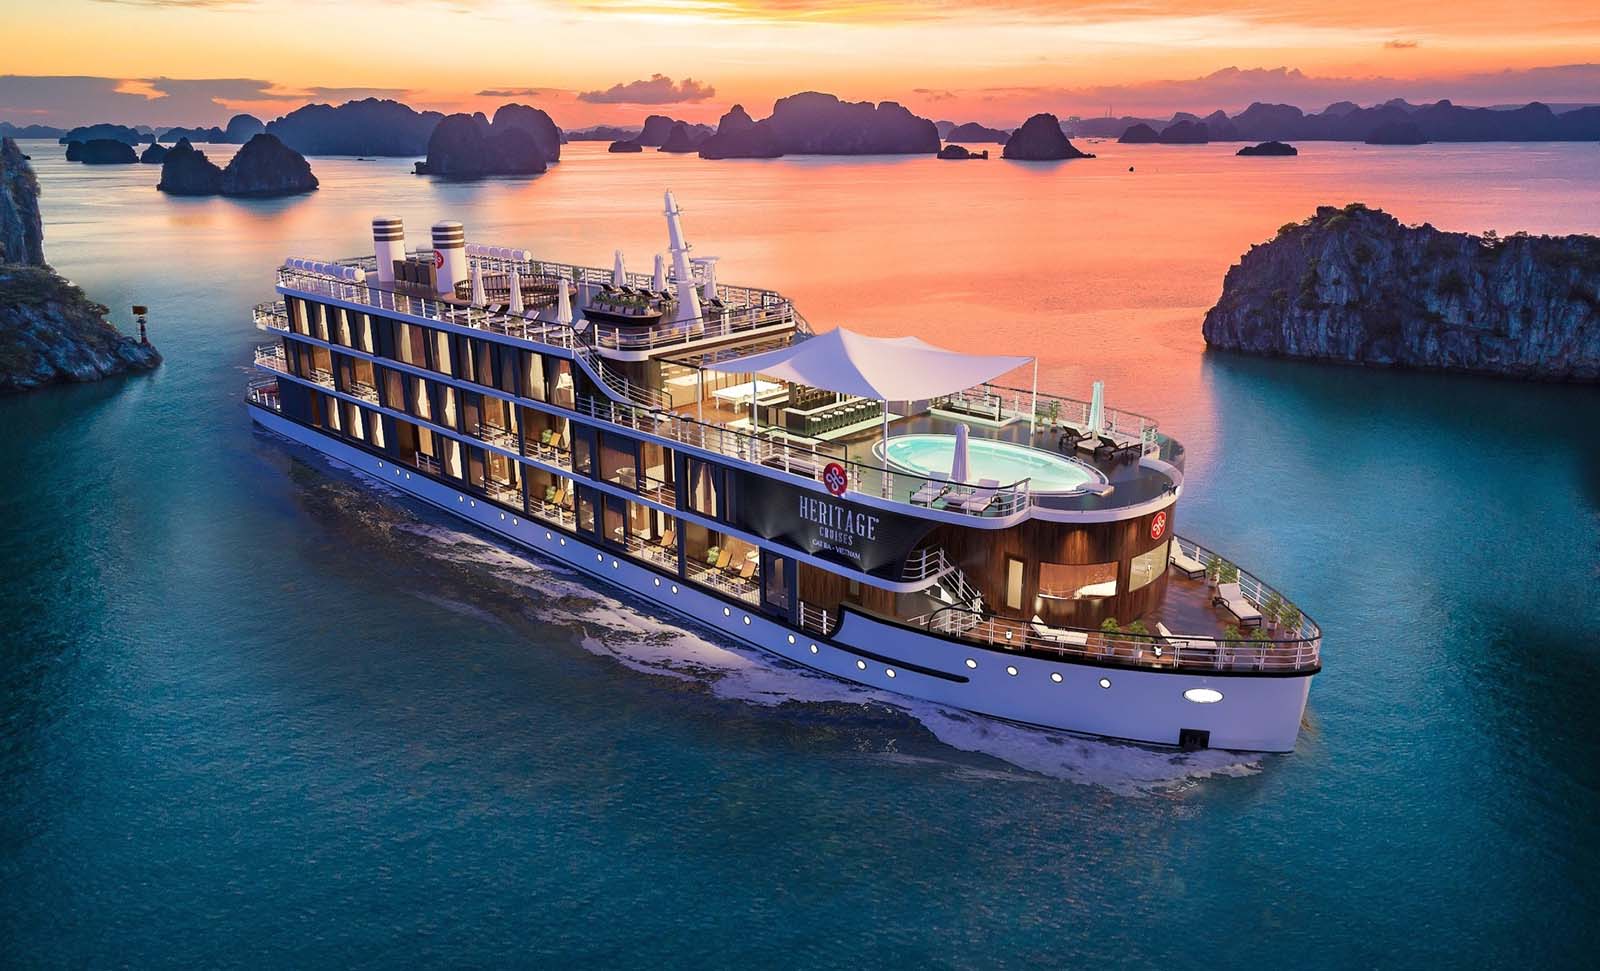 Discover everything you need to know about cruising in Halong Bay, from top activities to hidden gems.